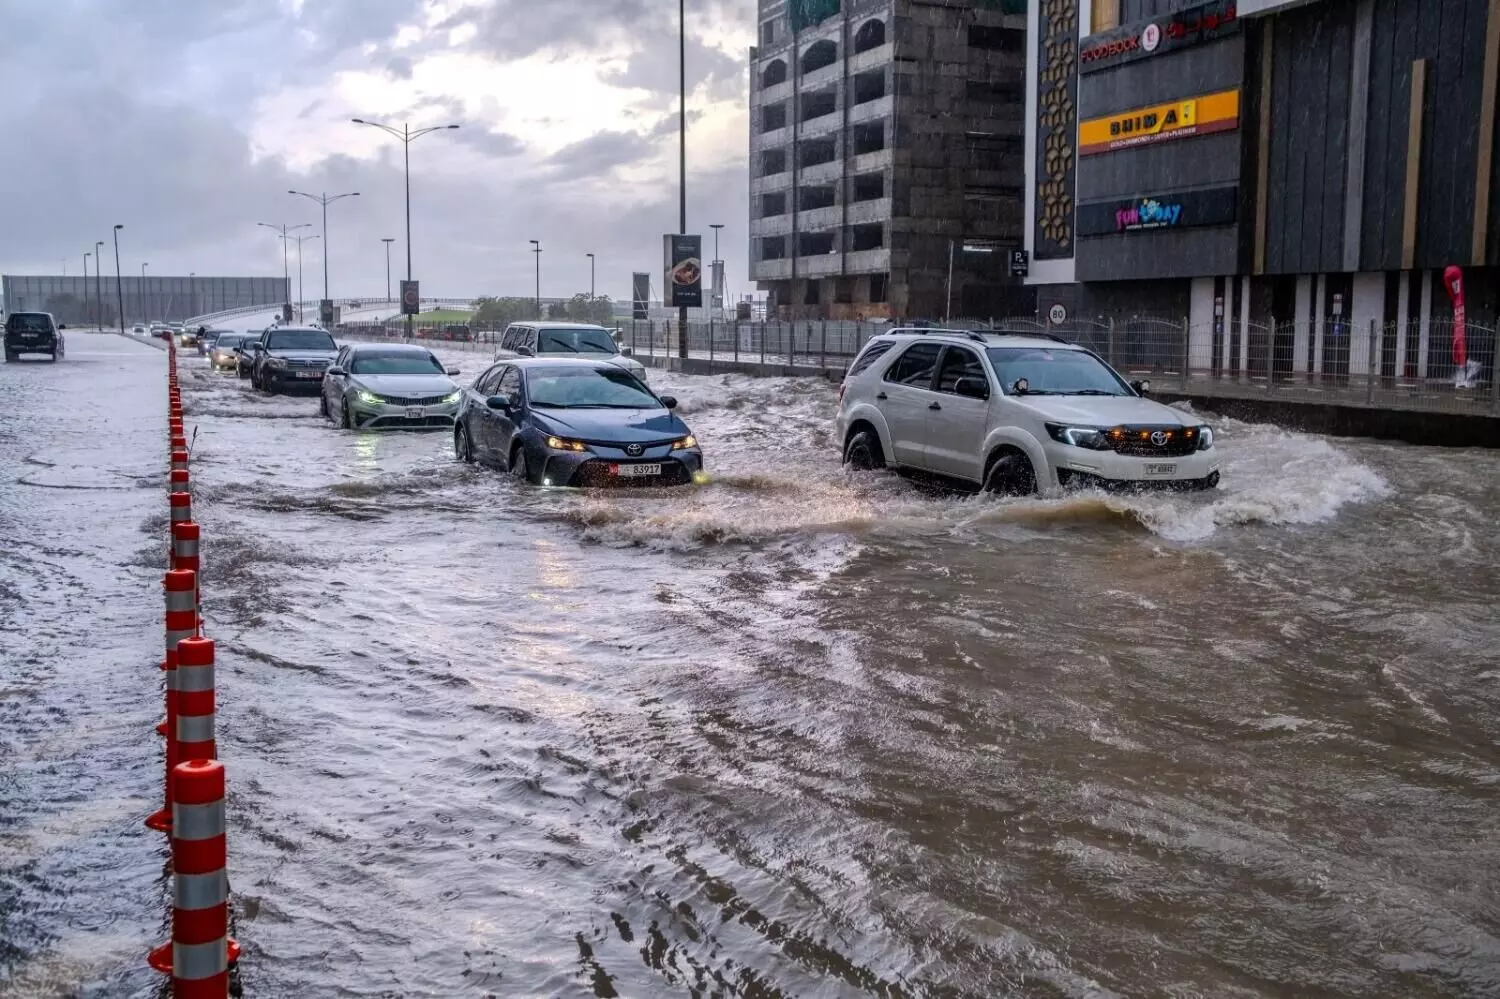 UAE issues red alert as weather condition intensifies across country